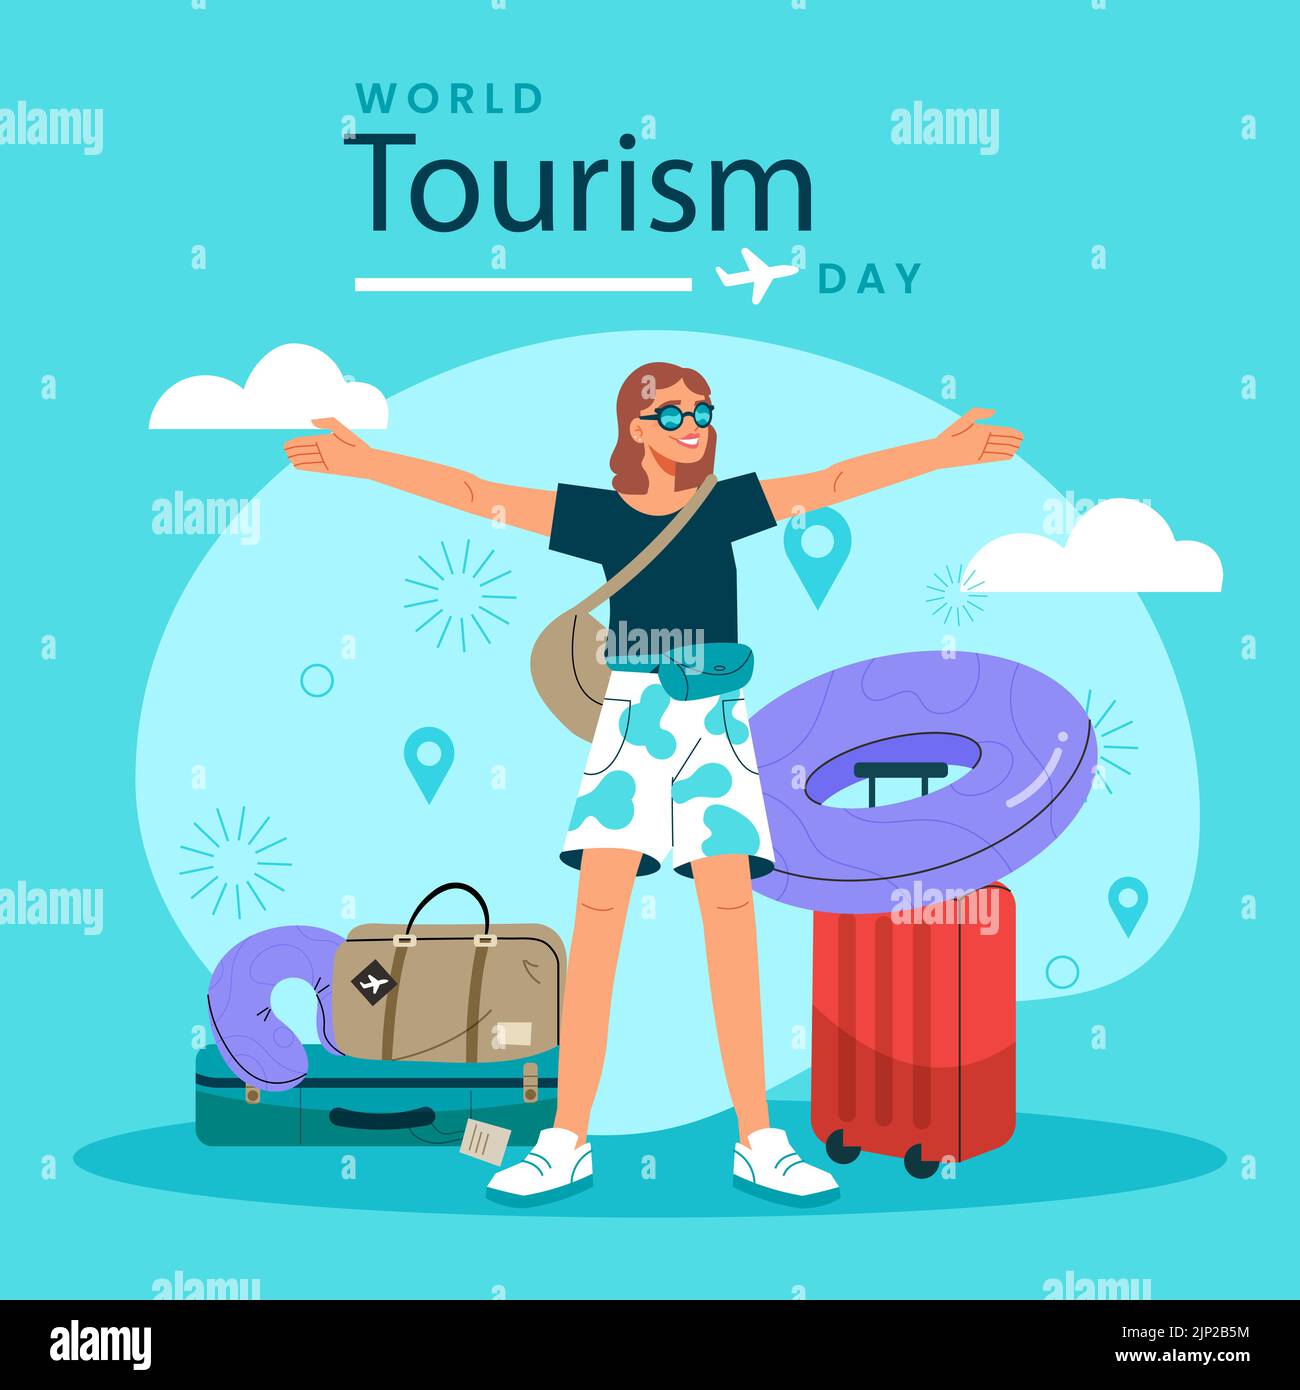 Flat illustration for world tourism day celebration, happy girl ready to travel Vector illustration Stock Vector